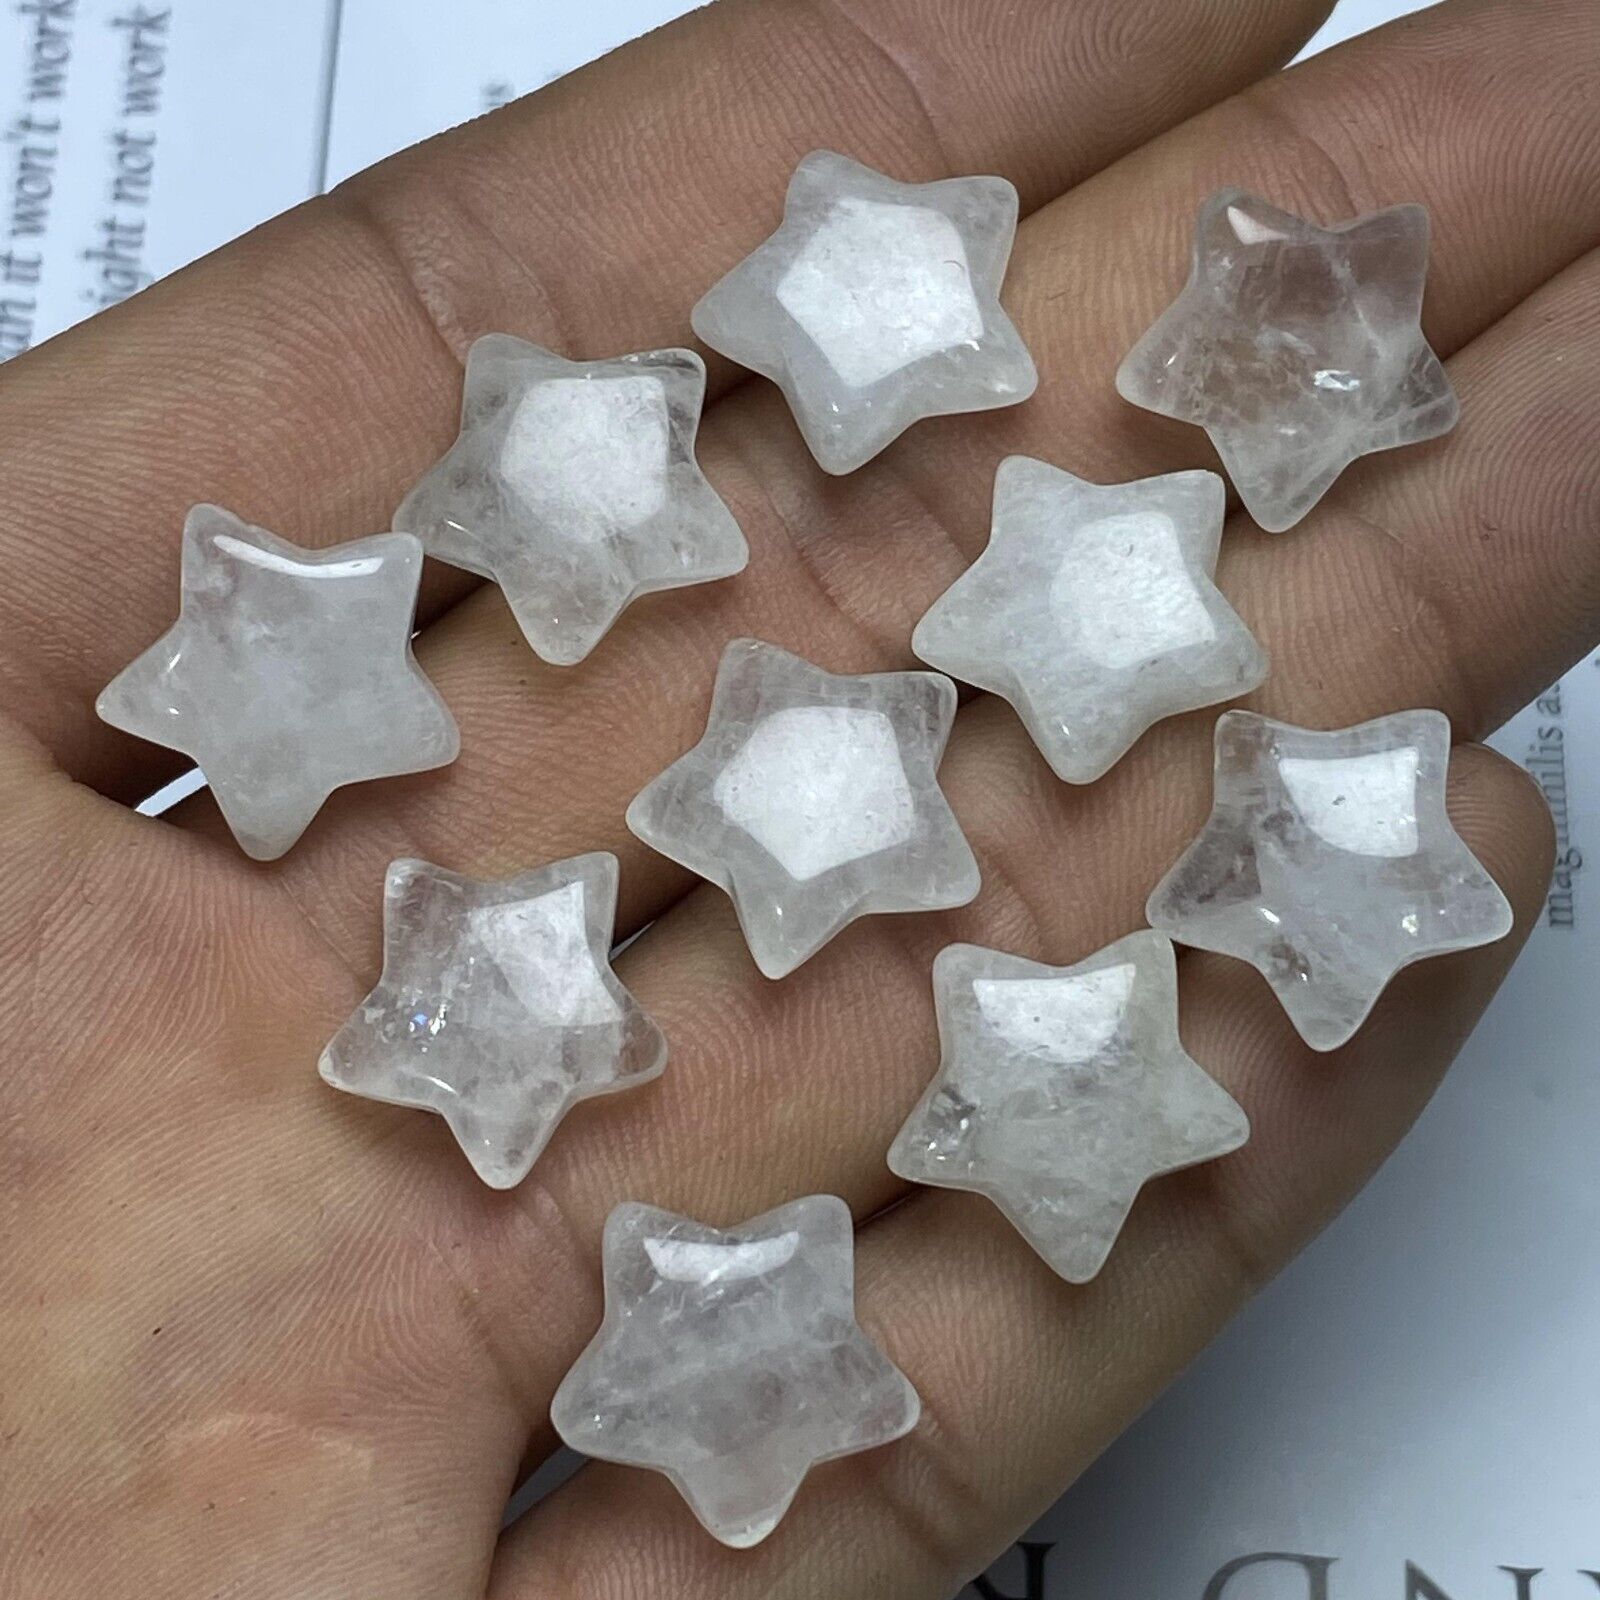 10pc Wholesale Natural Clear cryst carved mini star quartz crystal reiki healing